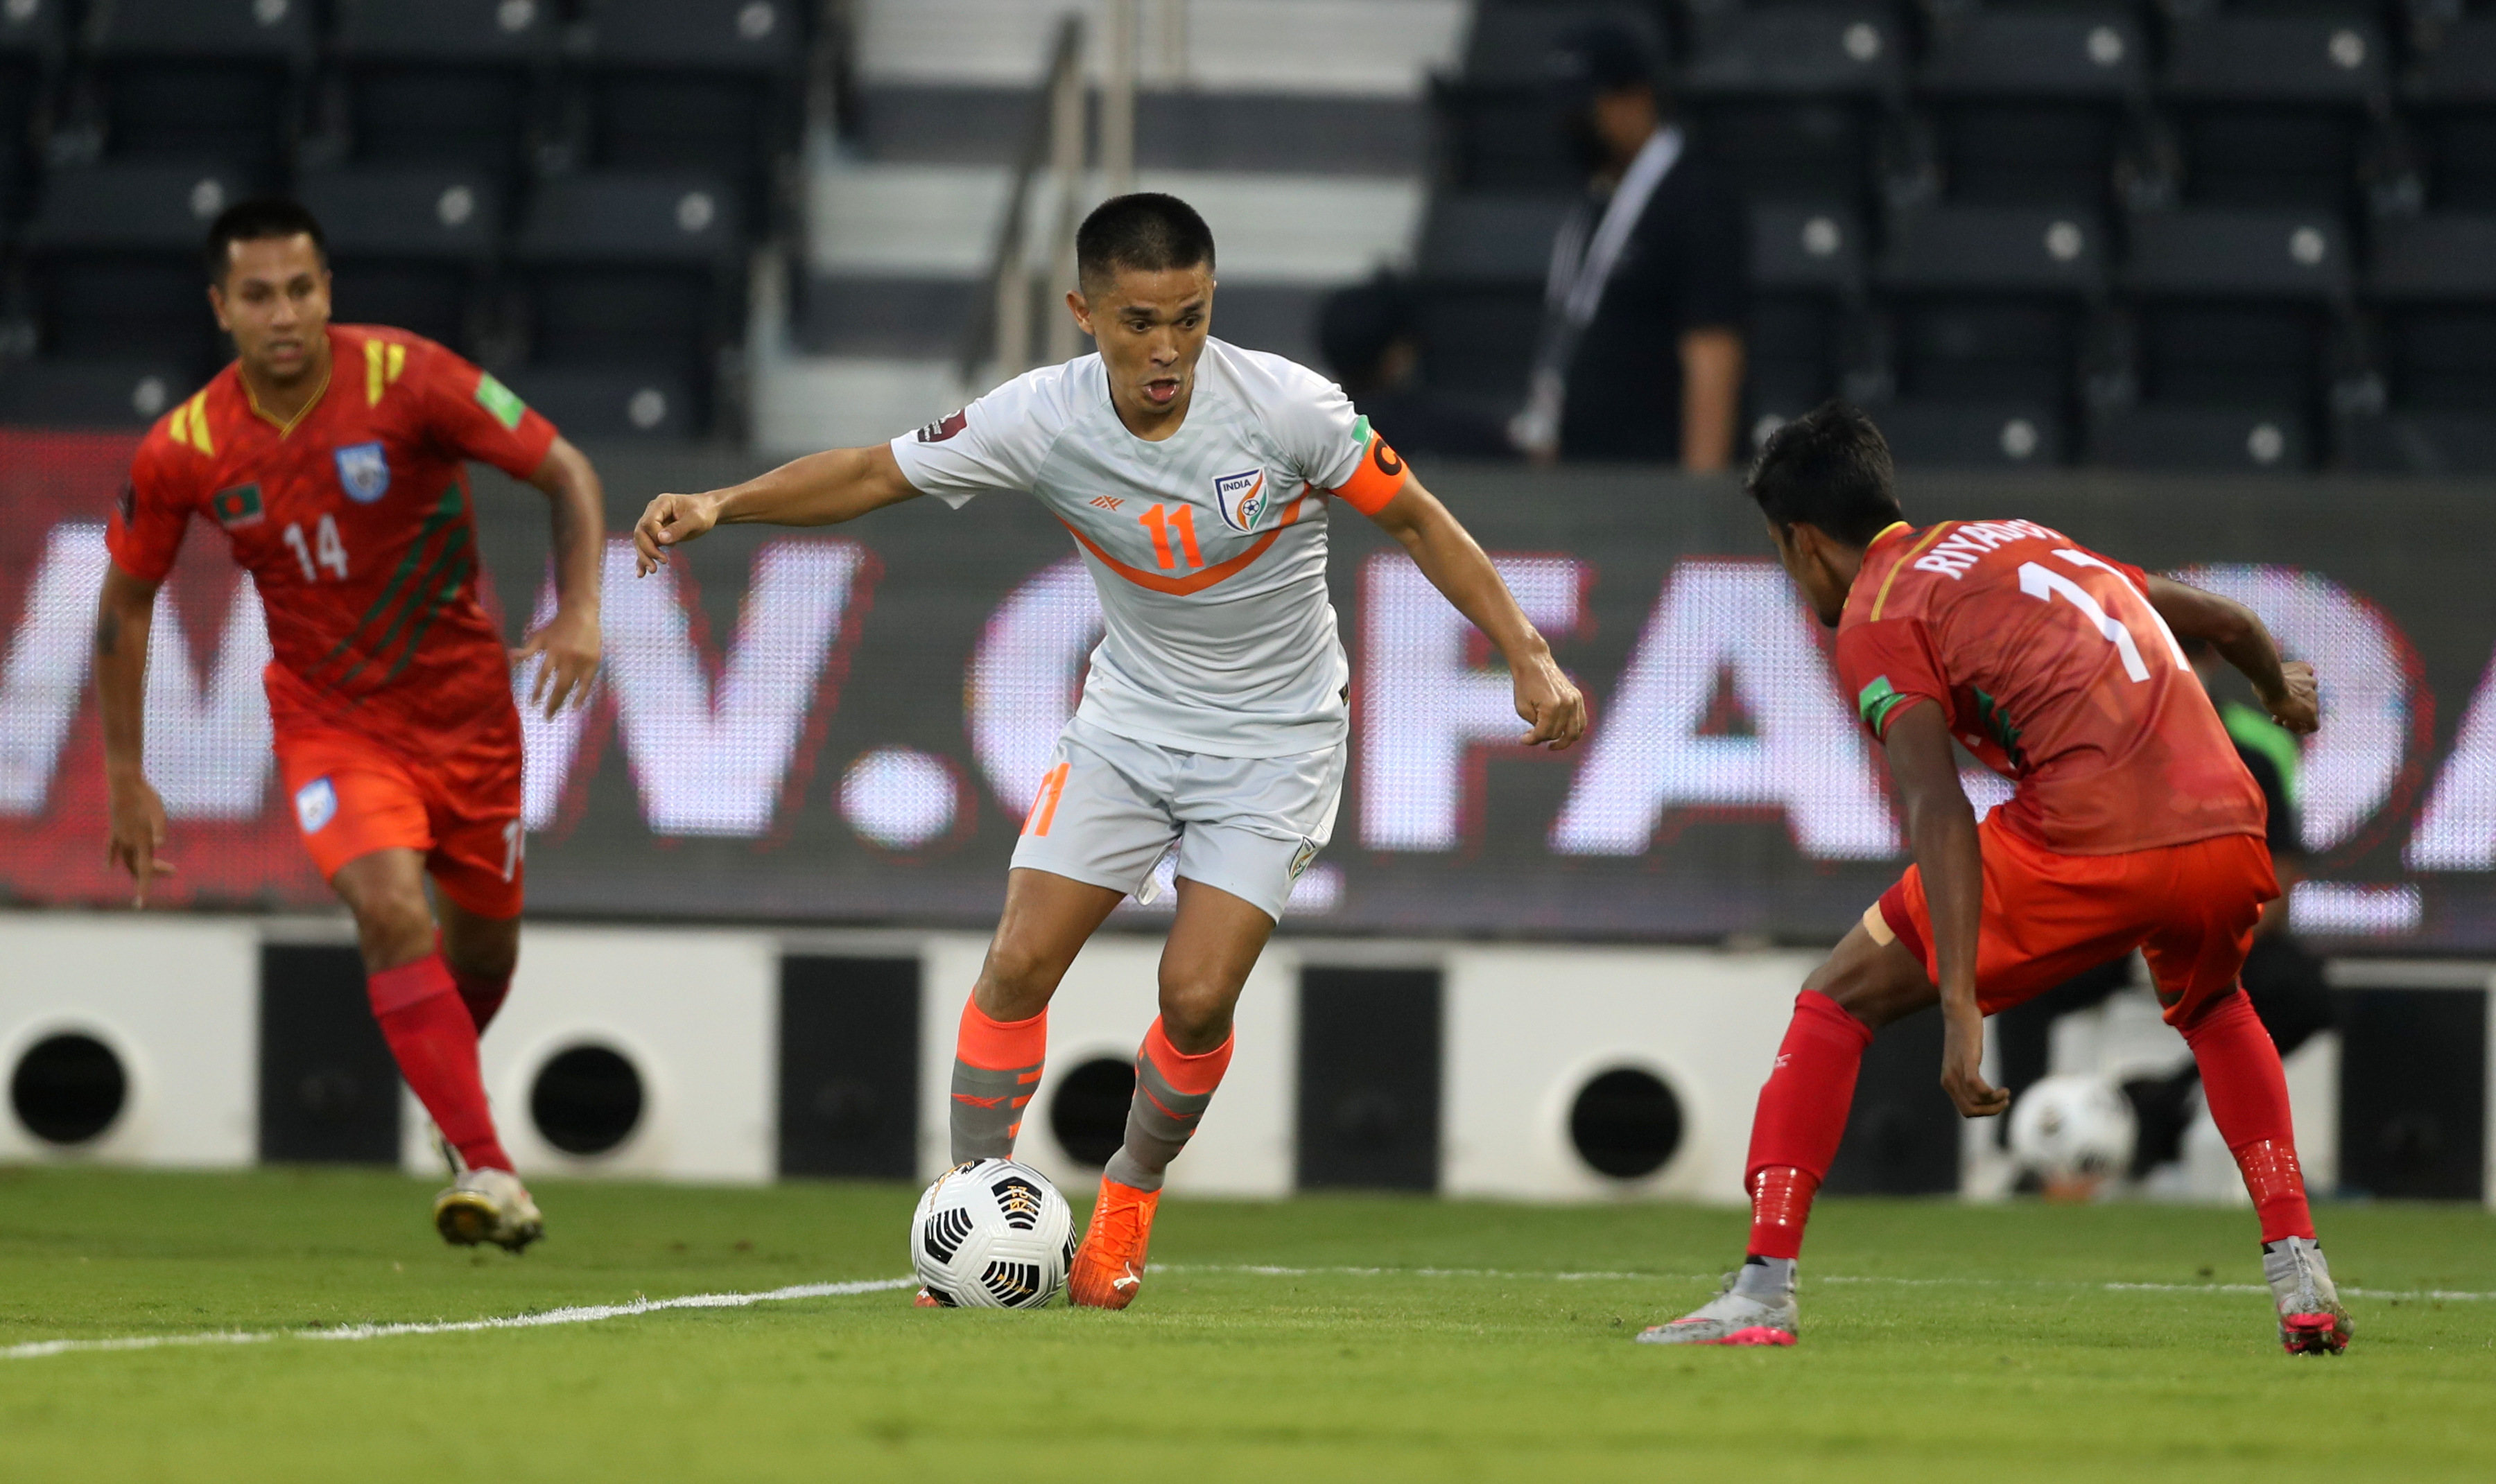 Indian Football News | Would be fruitful and satisfying to play in 2023 AFC Asian Cup, admits Sunil Chhetri